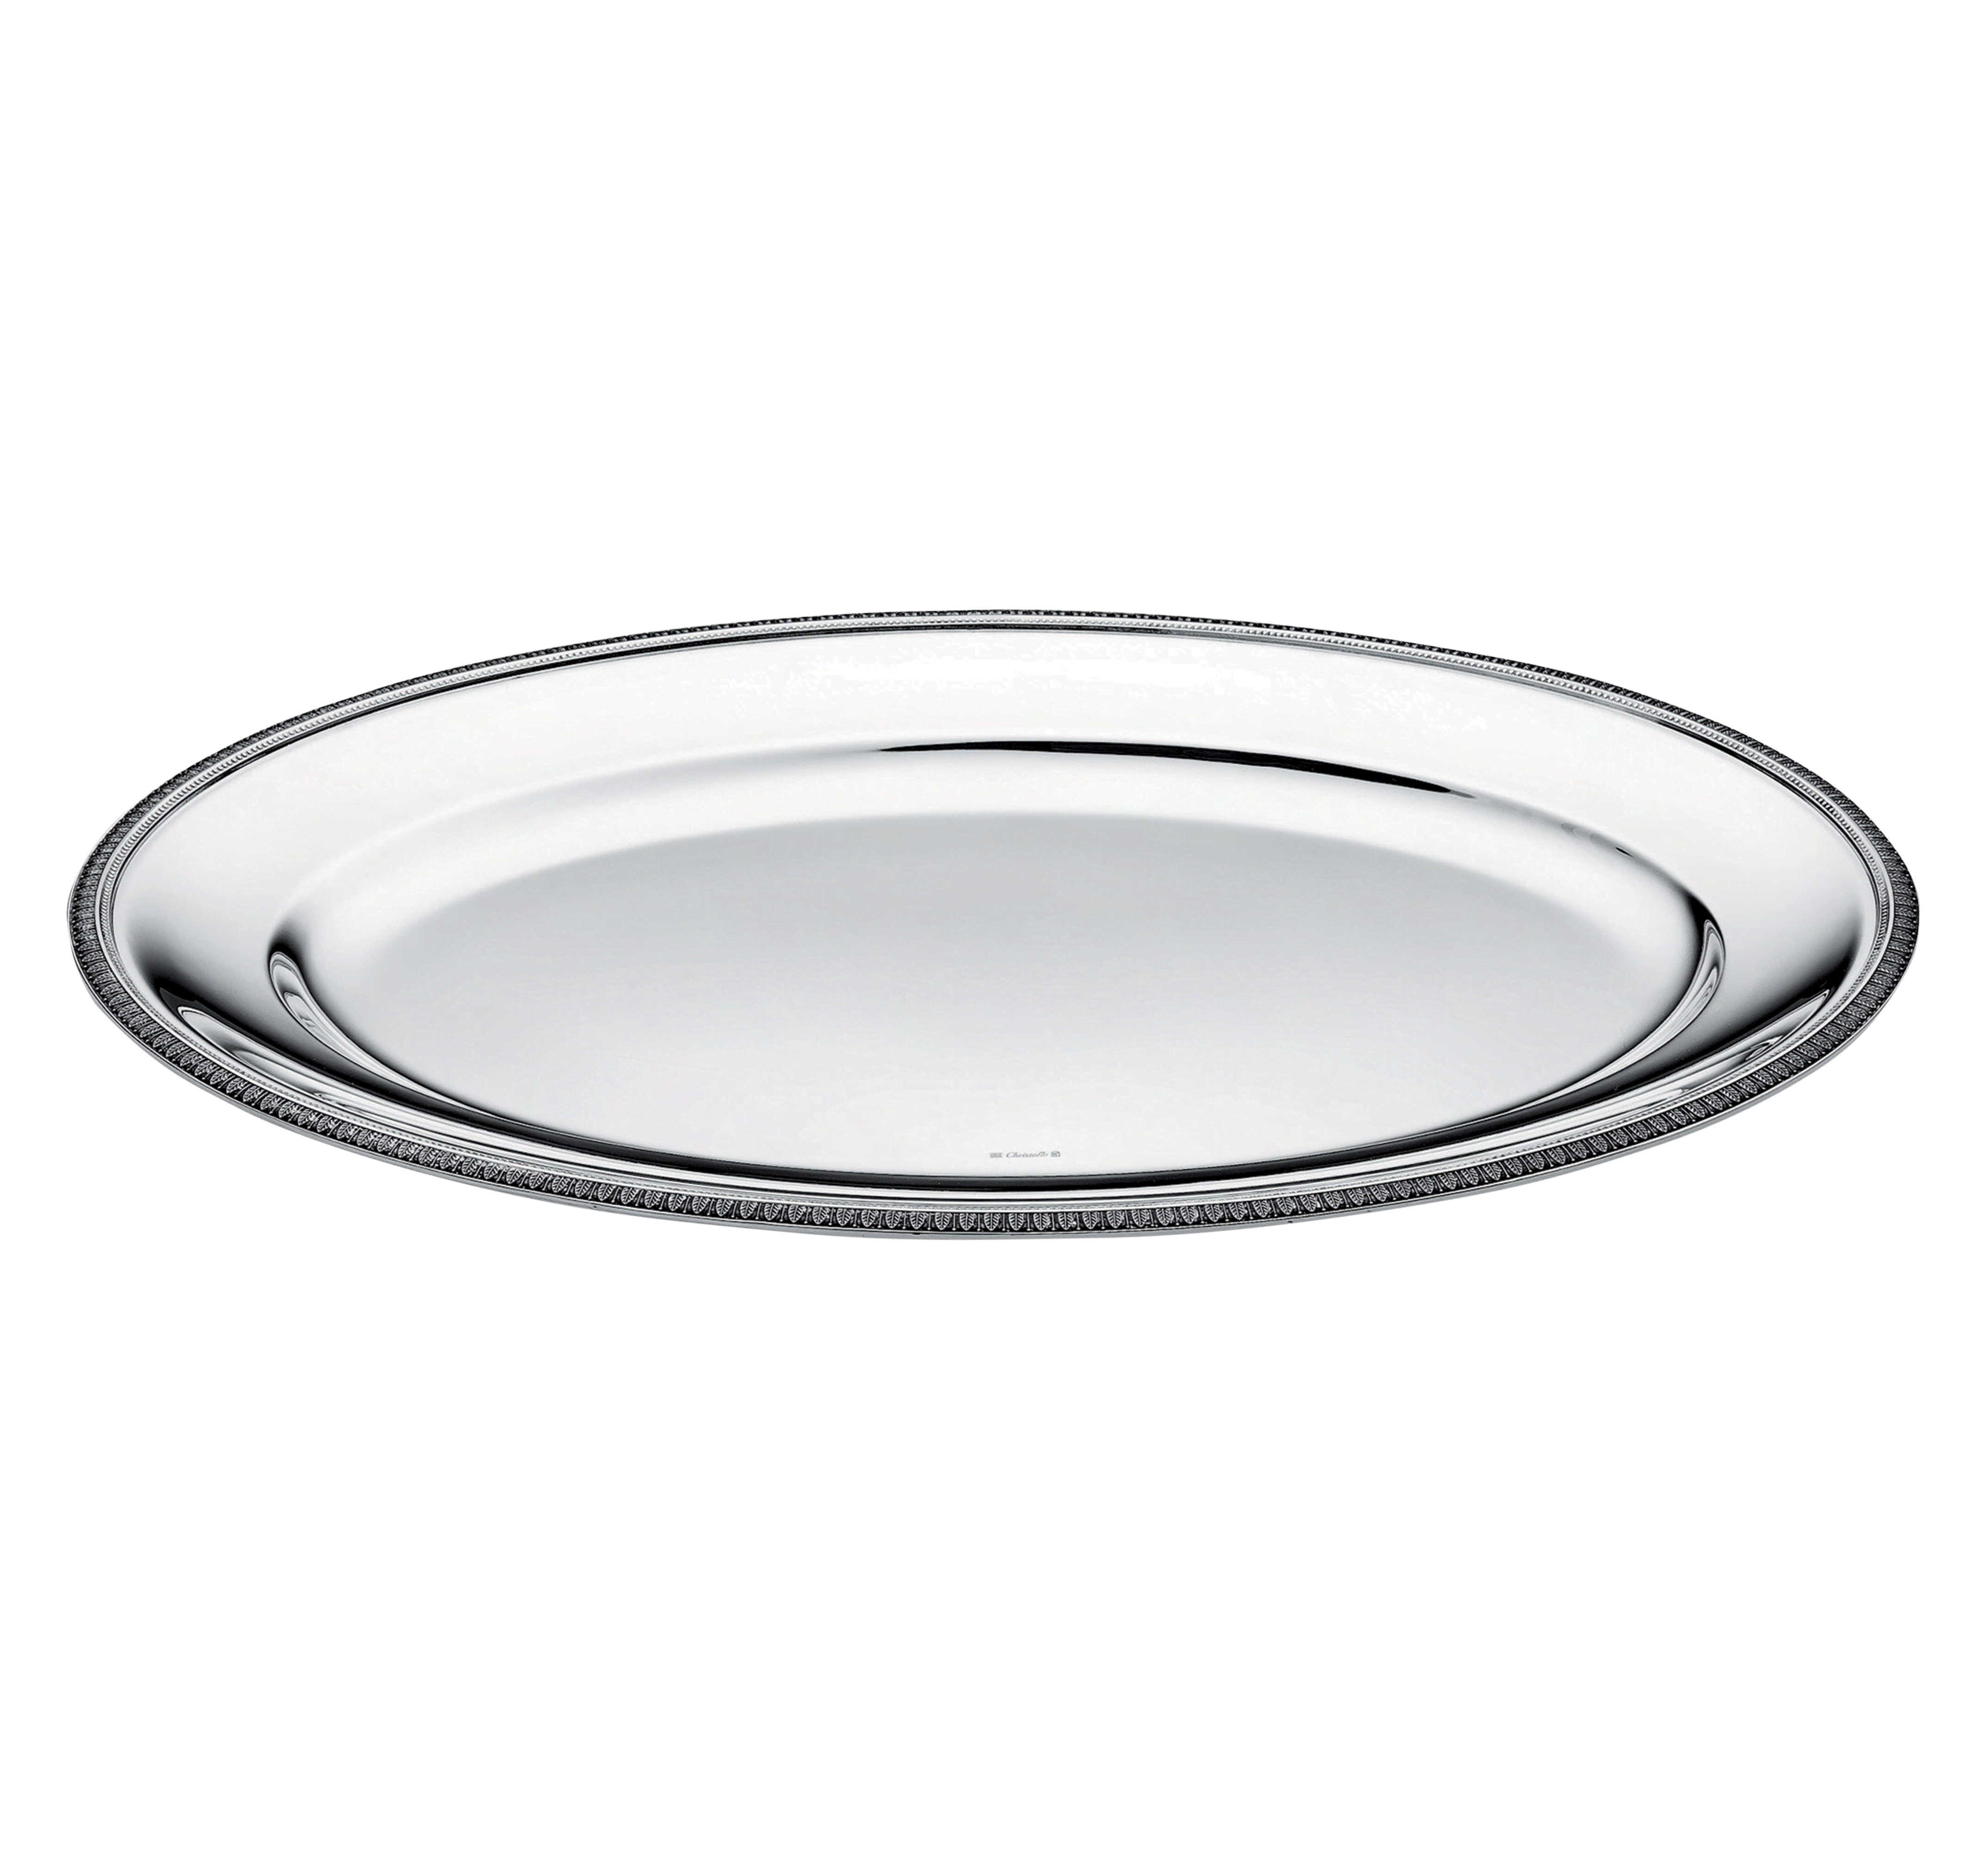 Silver-Plated Oval Platter 18 in Malmaison